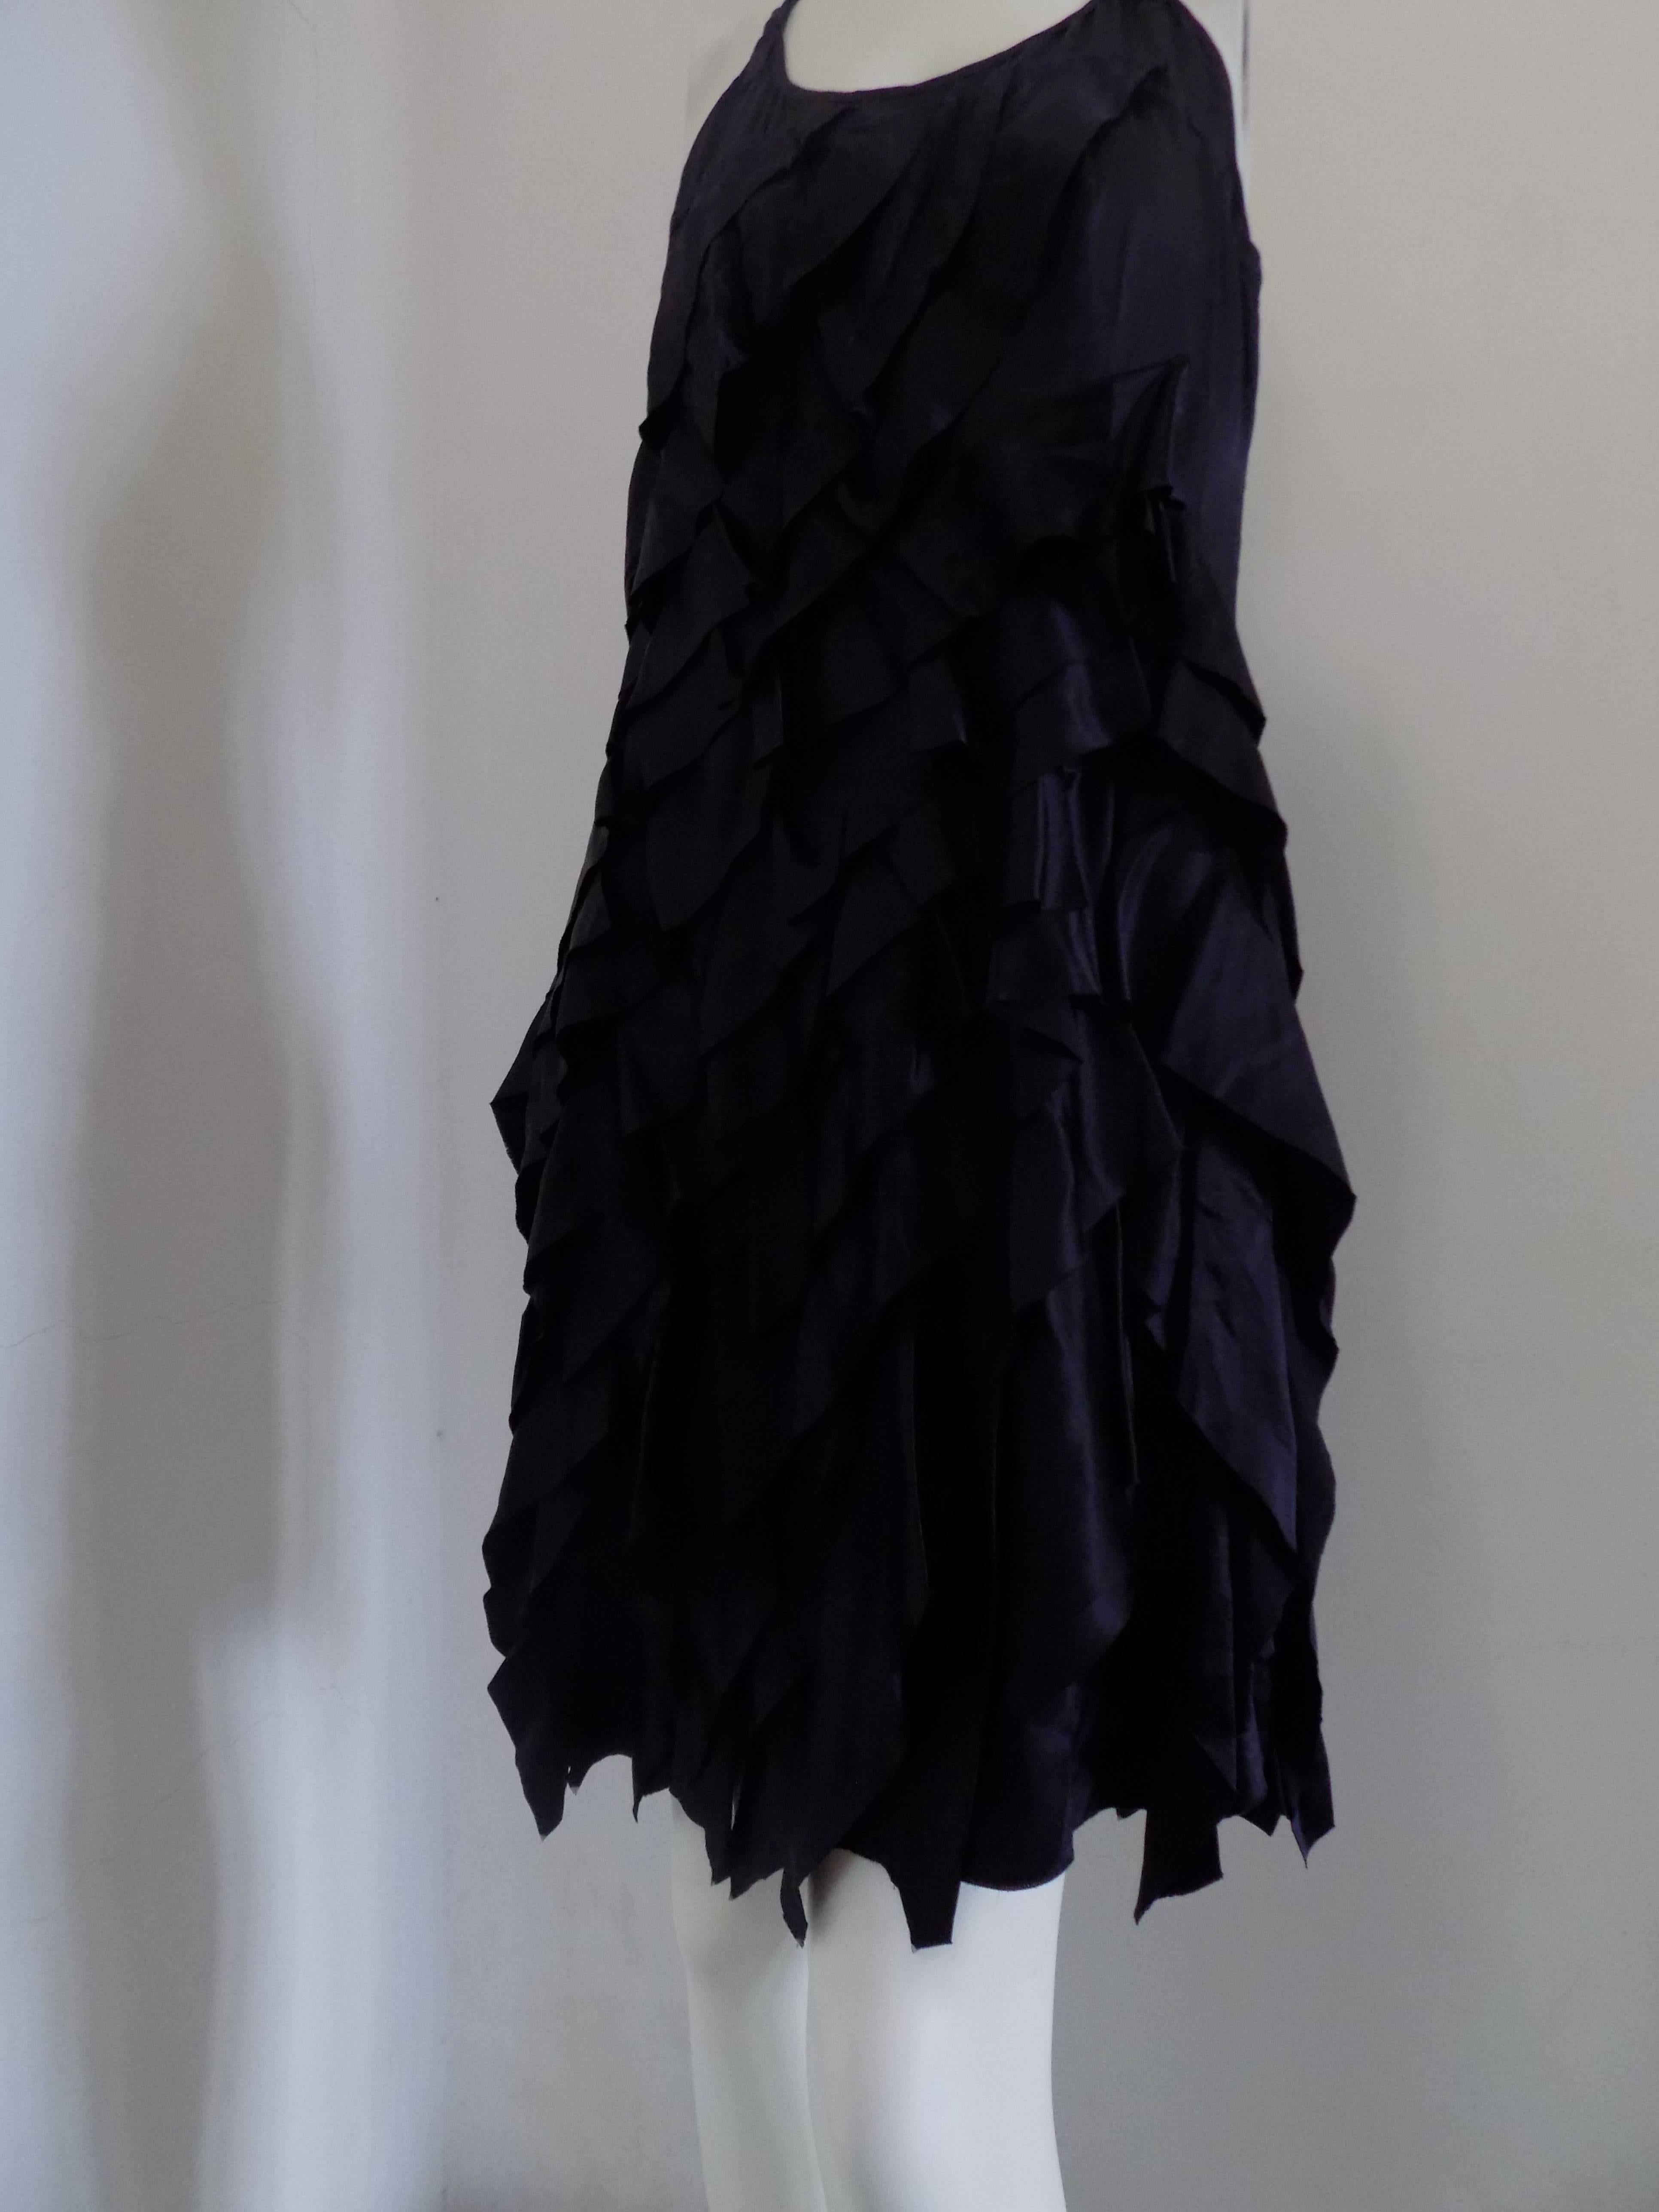 Prada black dress still with tags

Totally made in italy in italian size range 44

Total lenght 102h cm
bust 80 cm

composition: silk